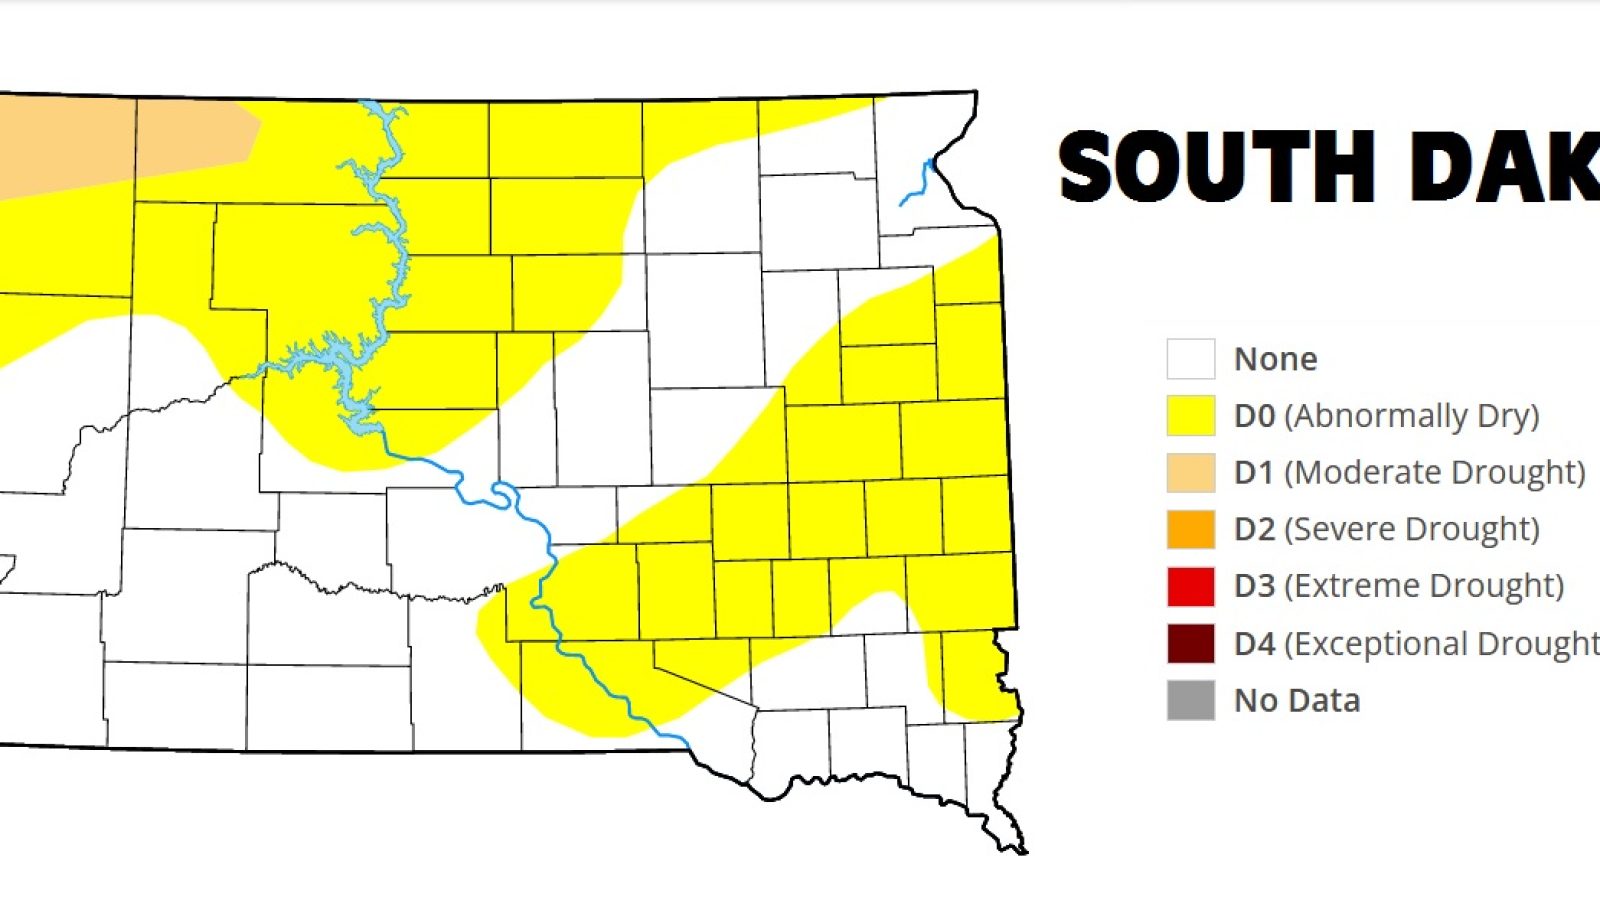 March 29 drought map